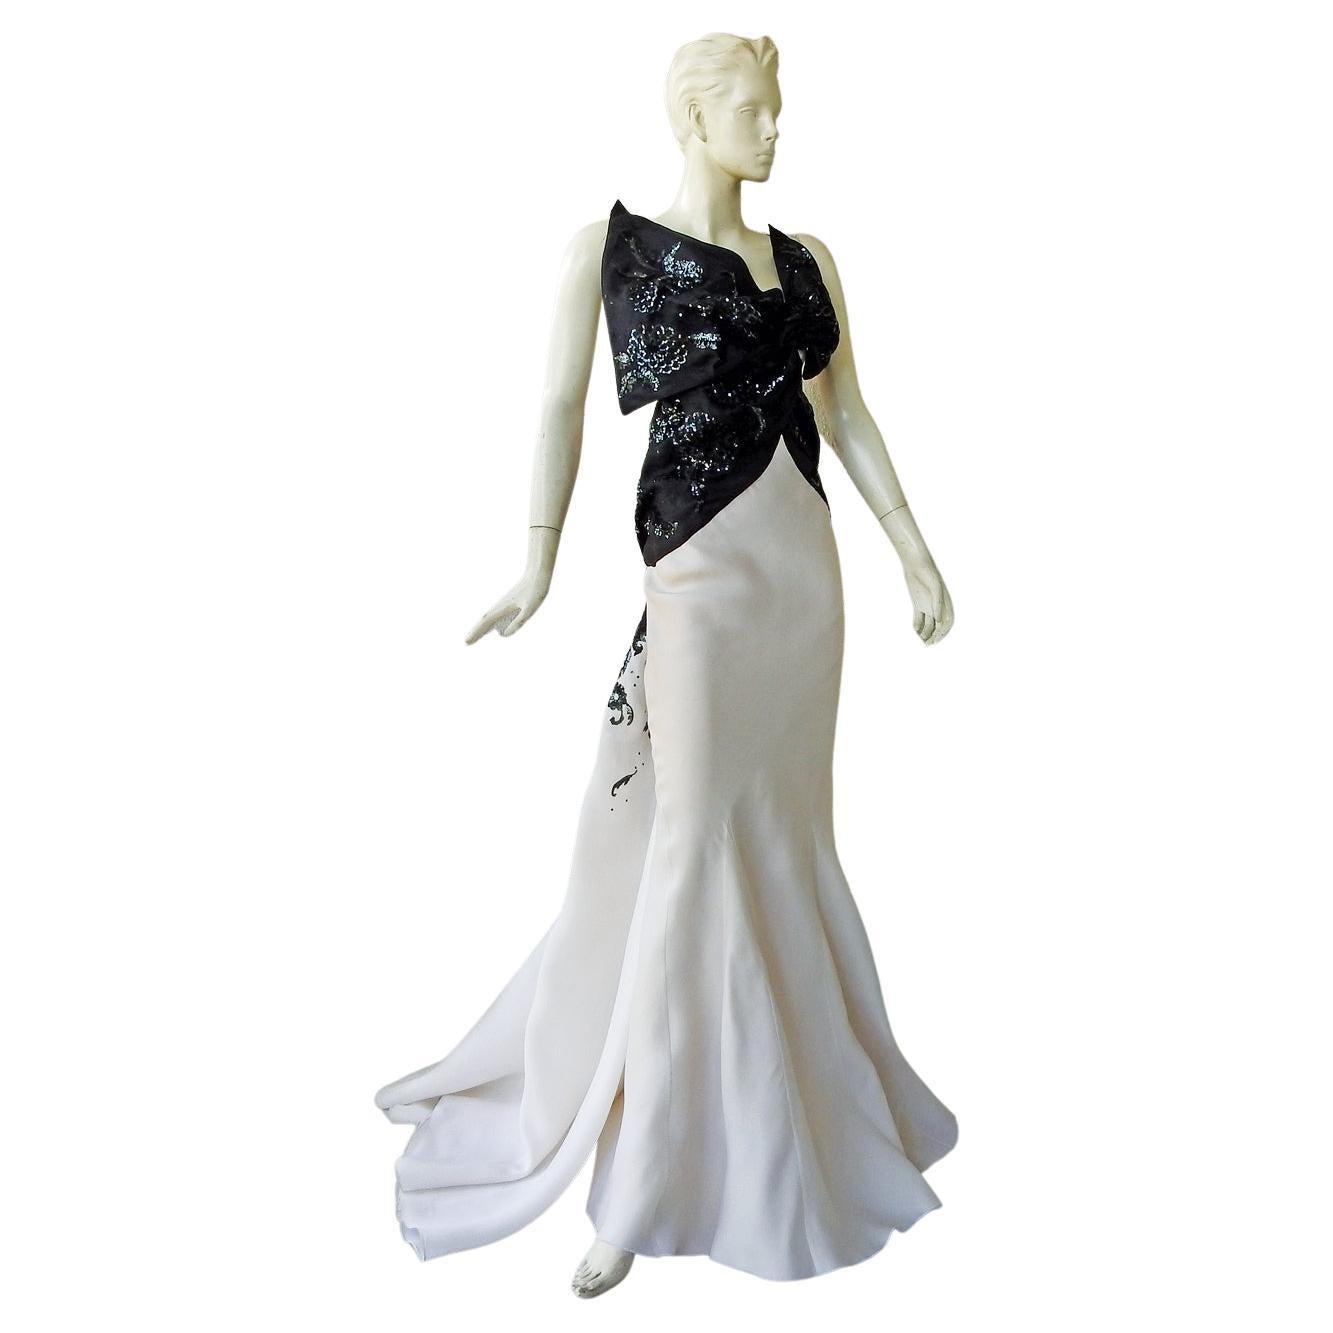 Christian Dior by John Galliano F/W 2007 Runway Gown For Sale